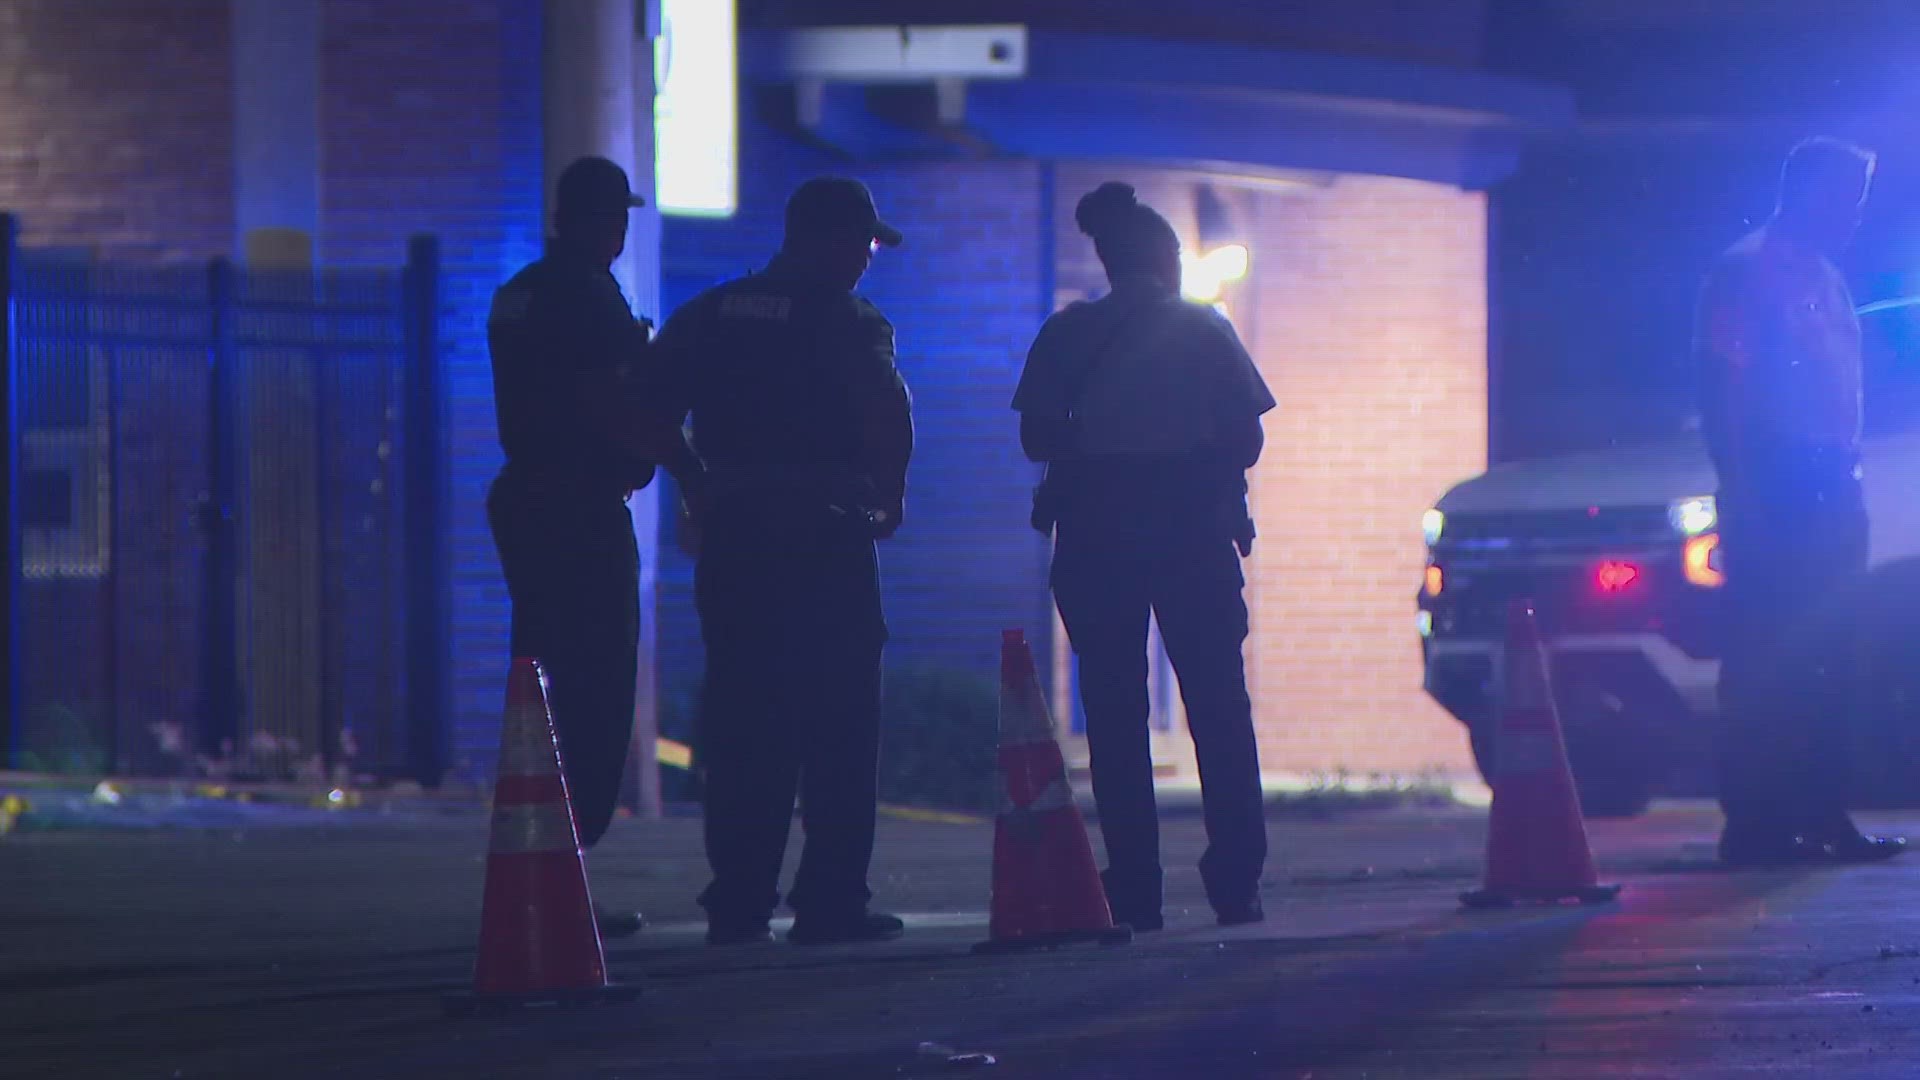 A man died early Wednesday morning after a shooting near a nightclub in St. Louis' Soulard neighborhood. It happened just after 12:30 a.m. on South 7th Street.